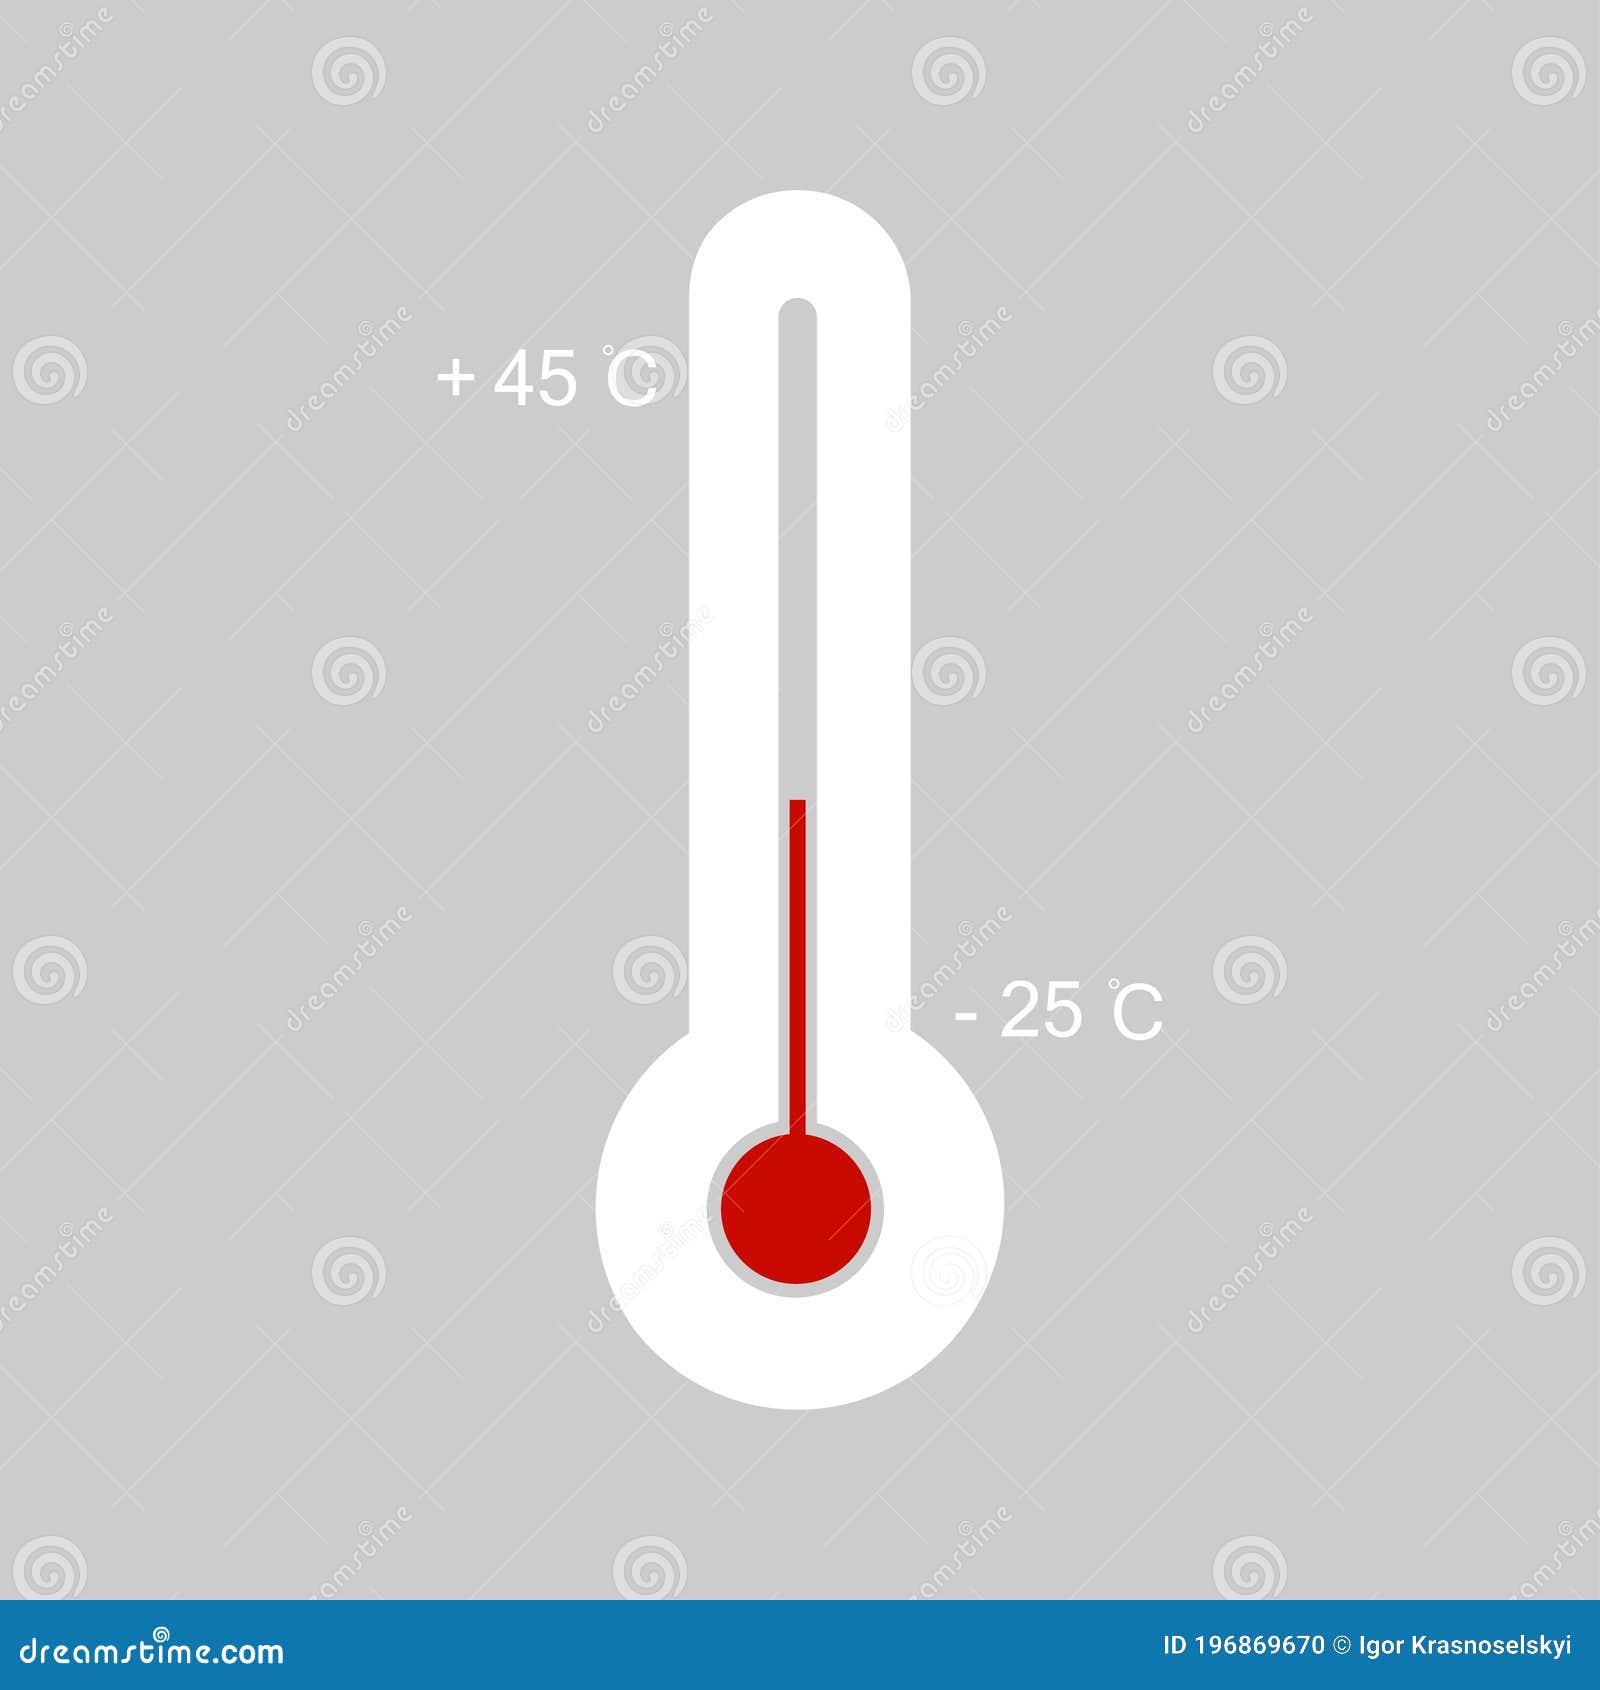 https://thumbs.dreamstime.com/z/thermometer-equipment-showing-hot-cold-weather-temperature-symbol-vector-illustration-196869670.jpg